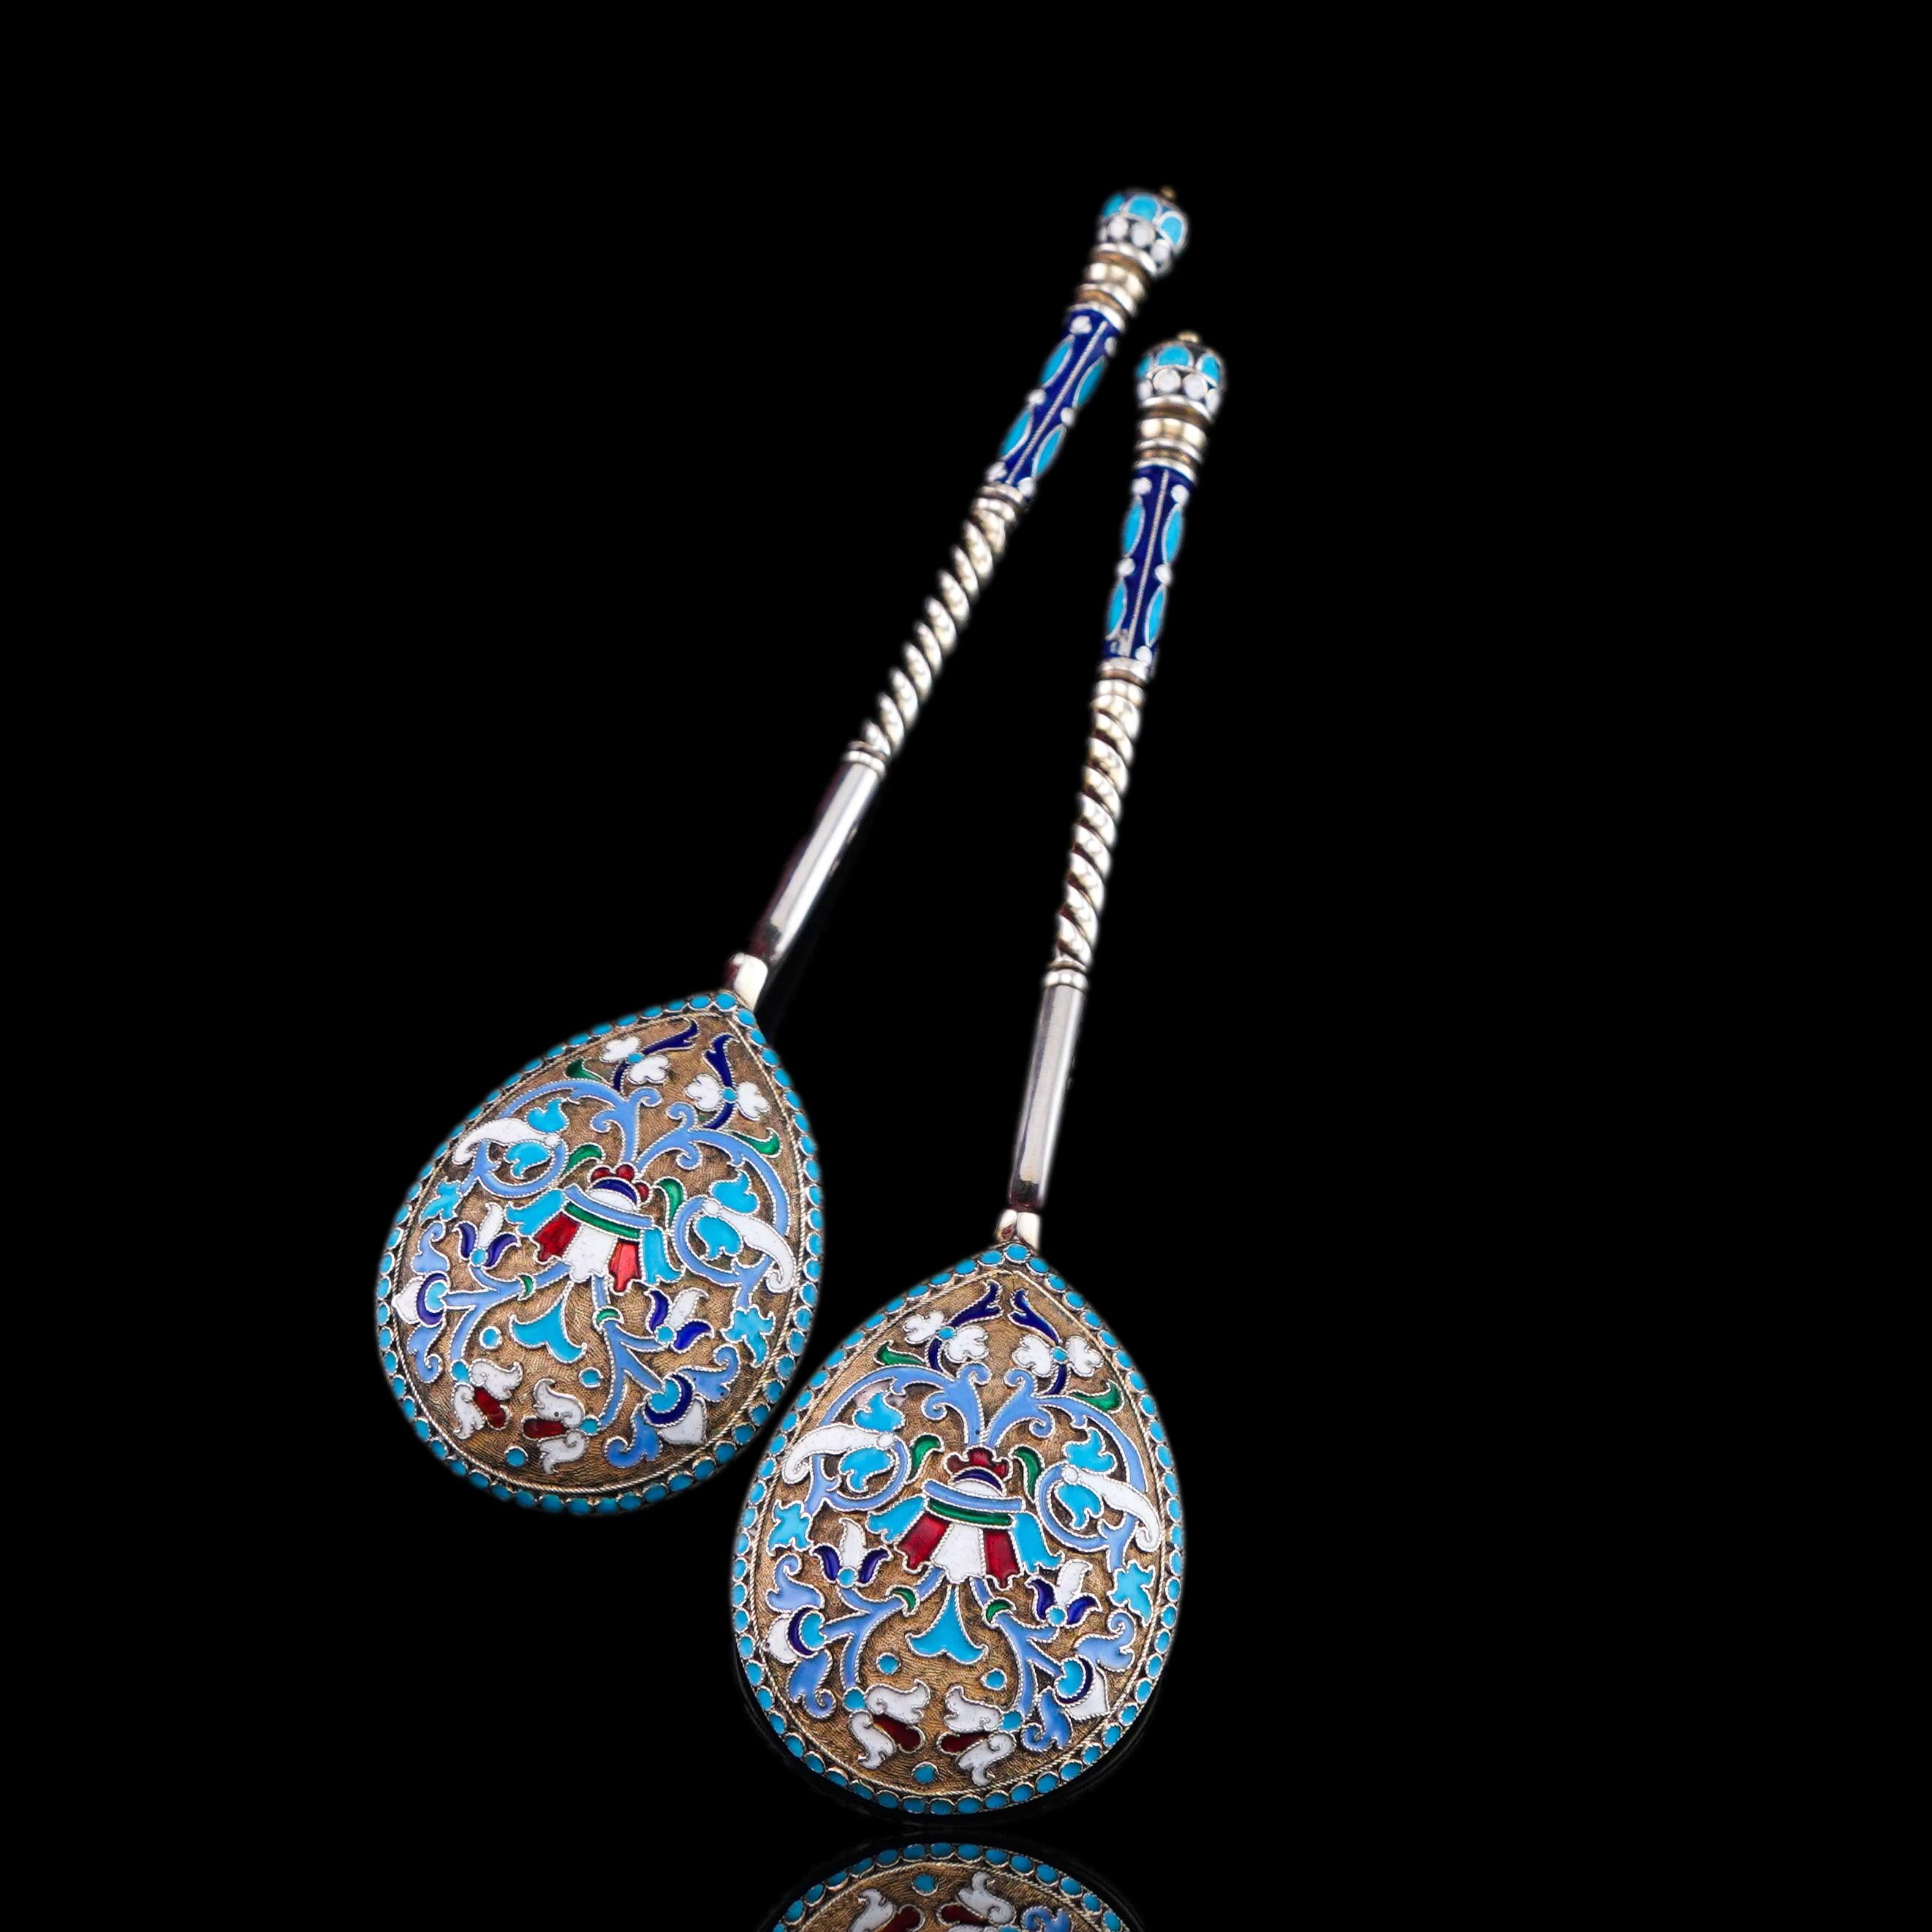 Antique Imperial Russian Solid Silver Spoons with Cloisonne Enamel c.1882 For Sale 12